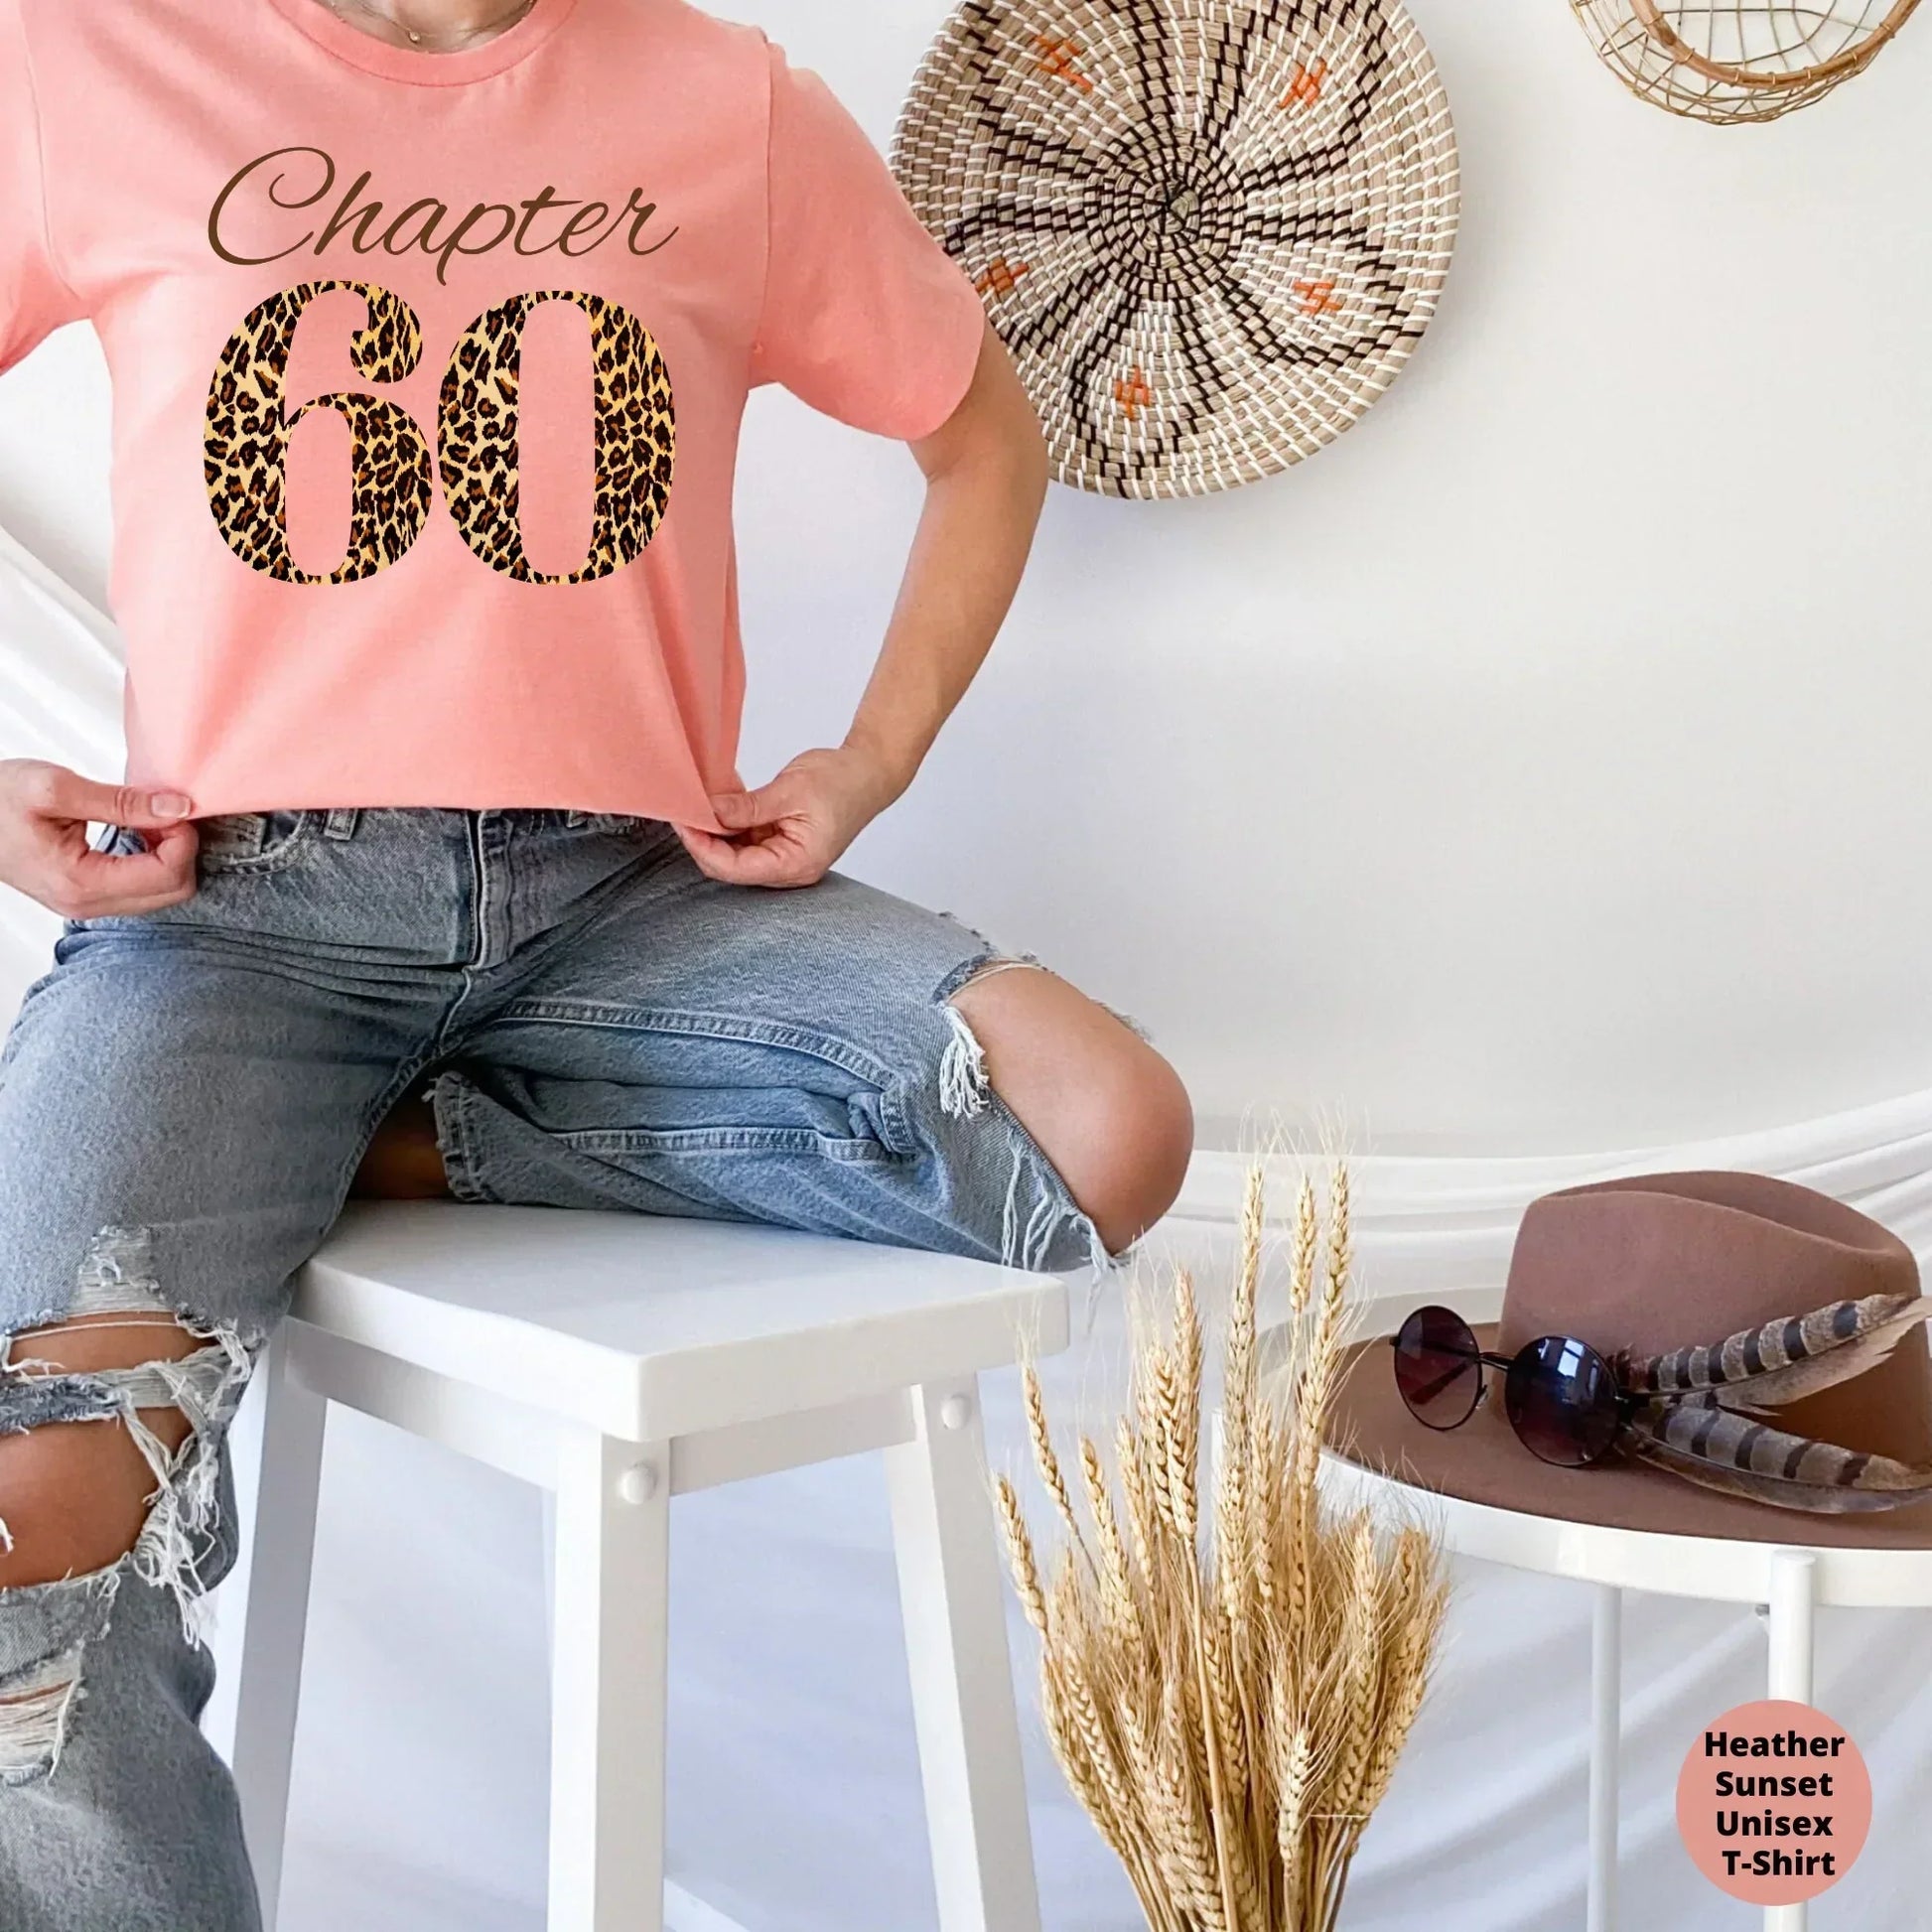 Chapter Sixty Birthday Shirt, Embrace Your Wisdom and Celebrate Your 60th Birthday with Style - Get Your Premium Birthday Shirt Today! HMDesignStudioUS